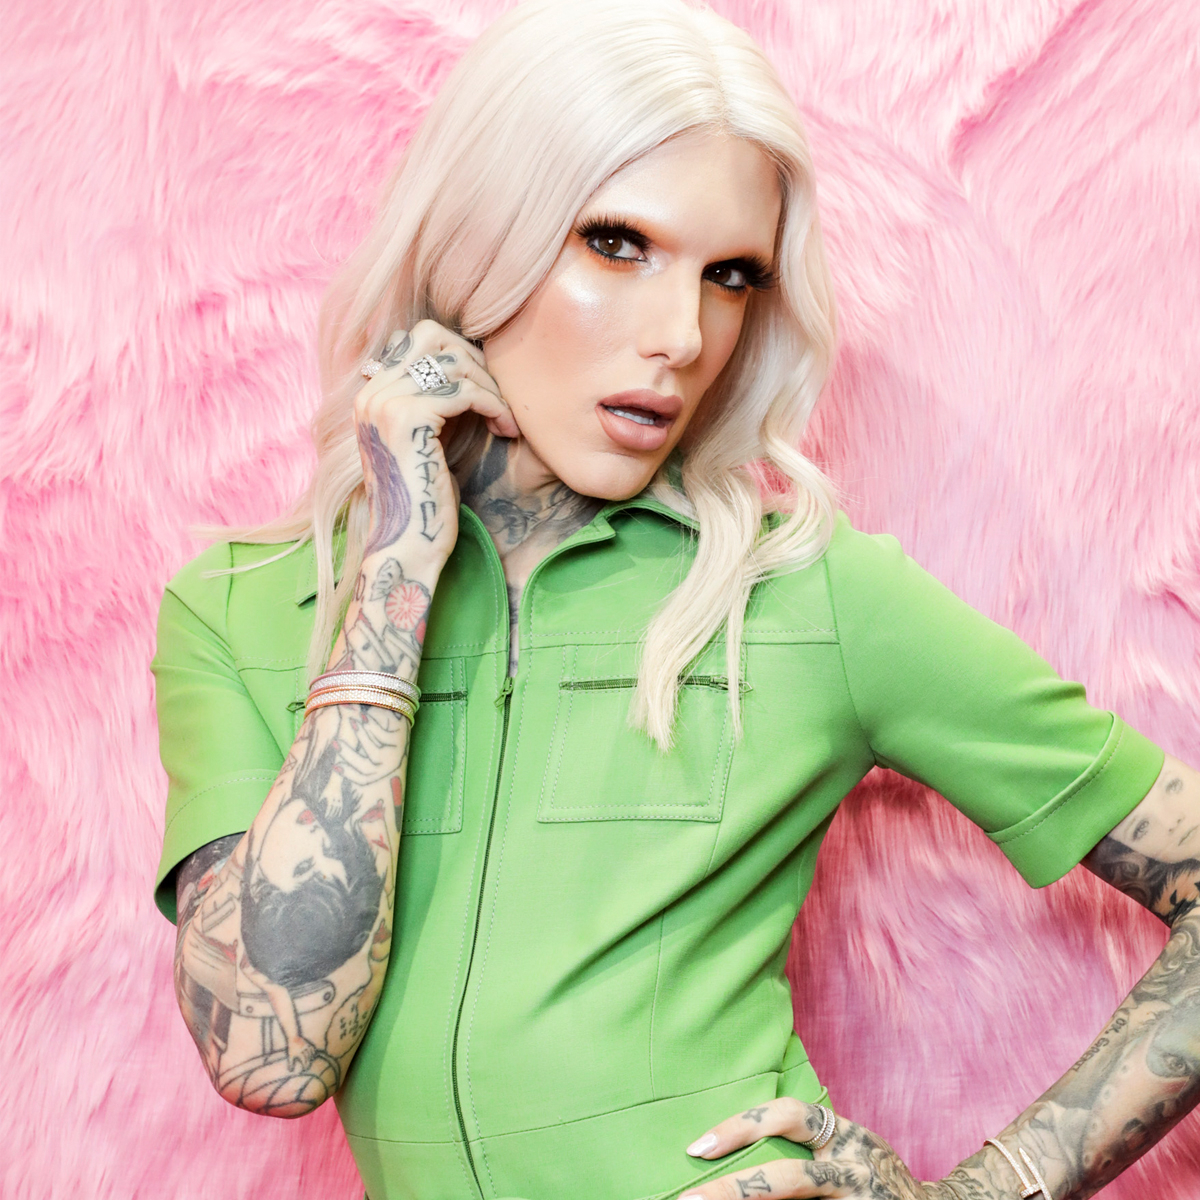 Jeffree Star is opening a store in Wyoming to sell 'makeup and